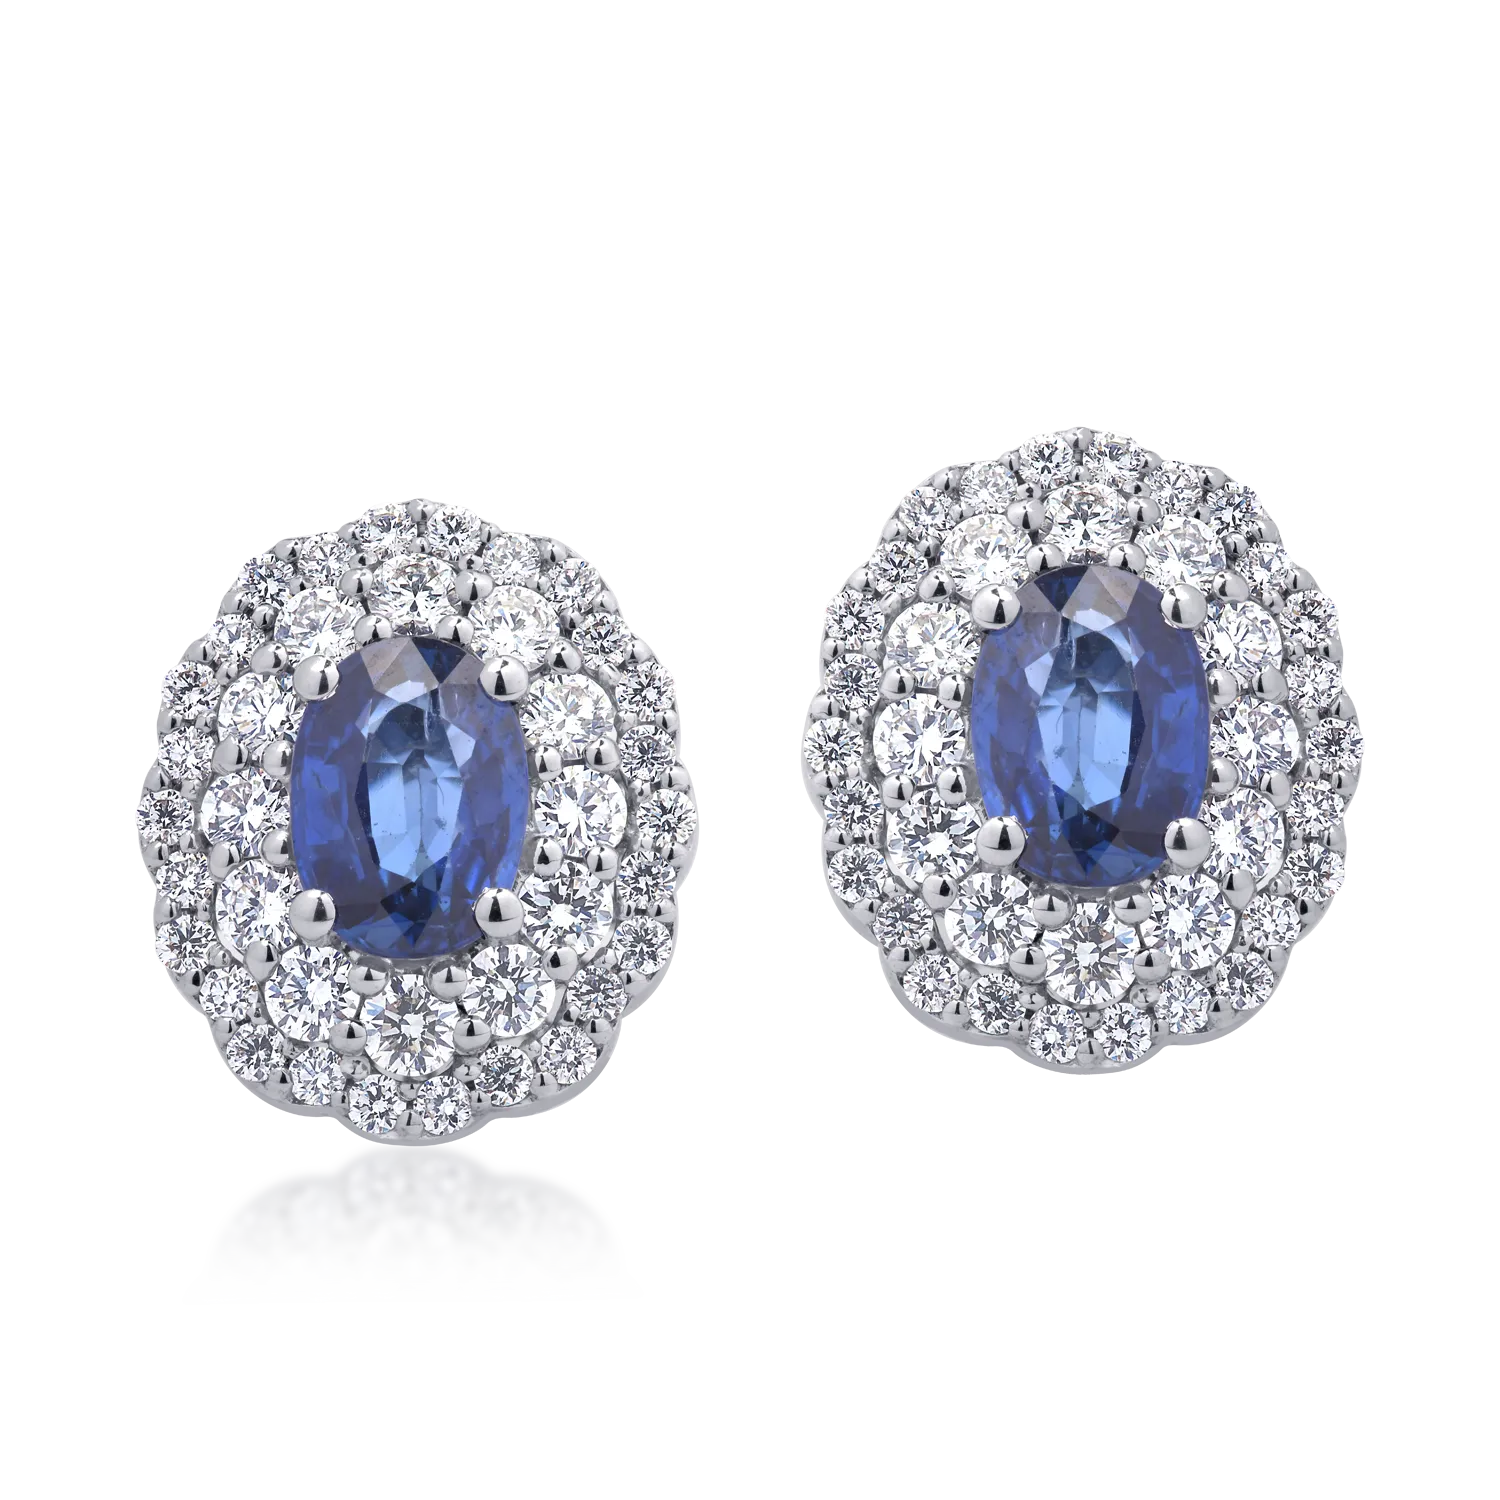 18K white gold earrings with 2.02ct sapphires and 1.13ct diamonds